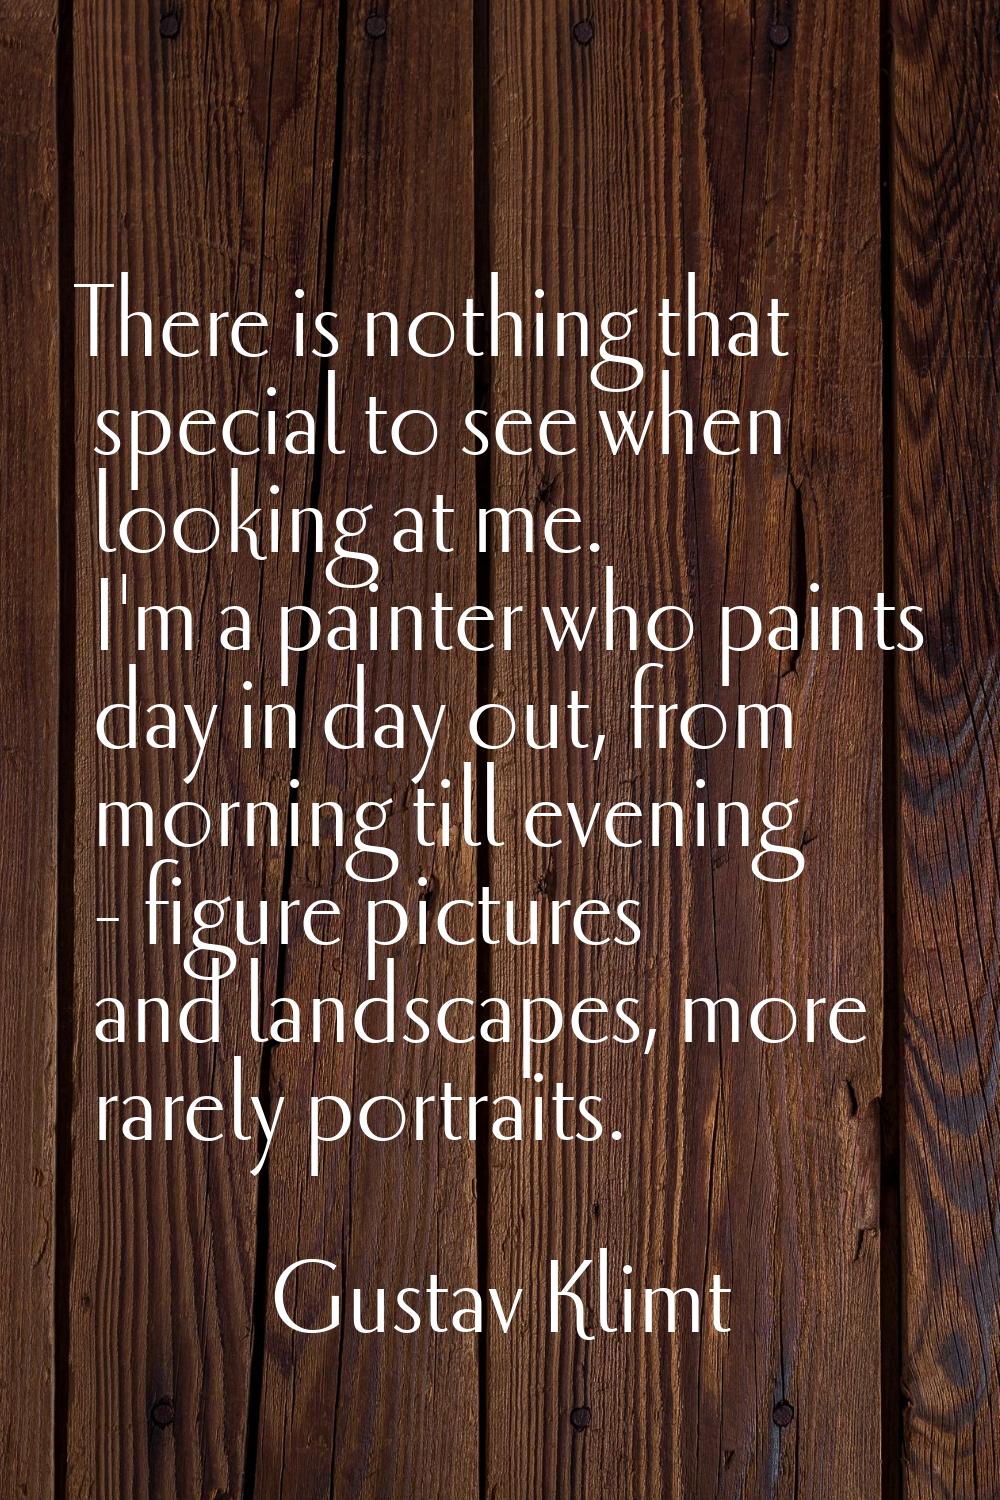 There is nothing that special to see when looking at me. I'm a painter who paints day in day out, f